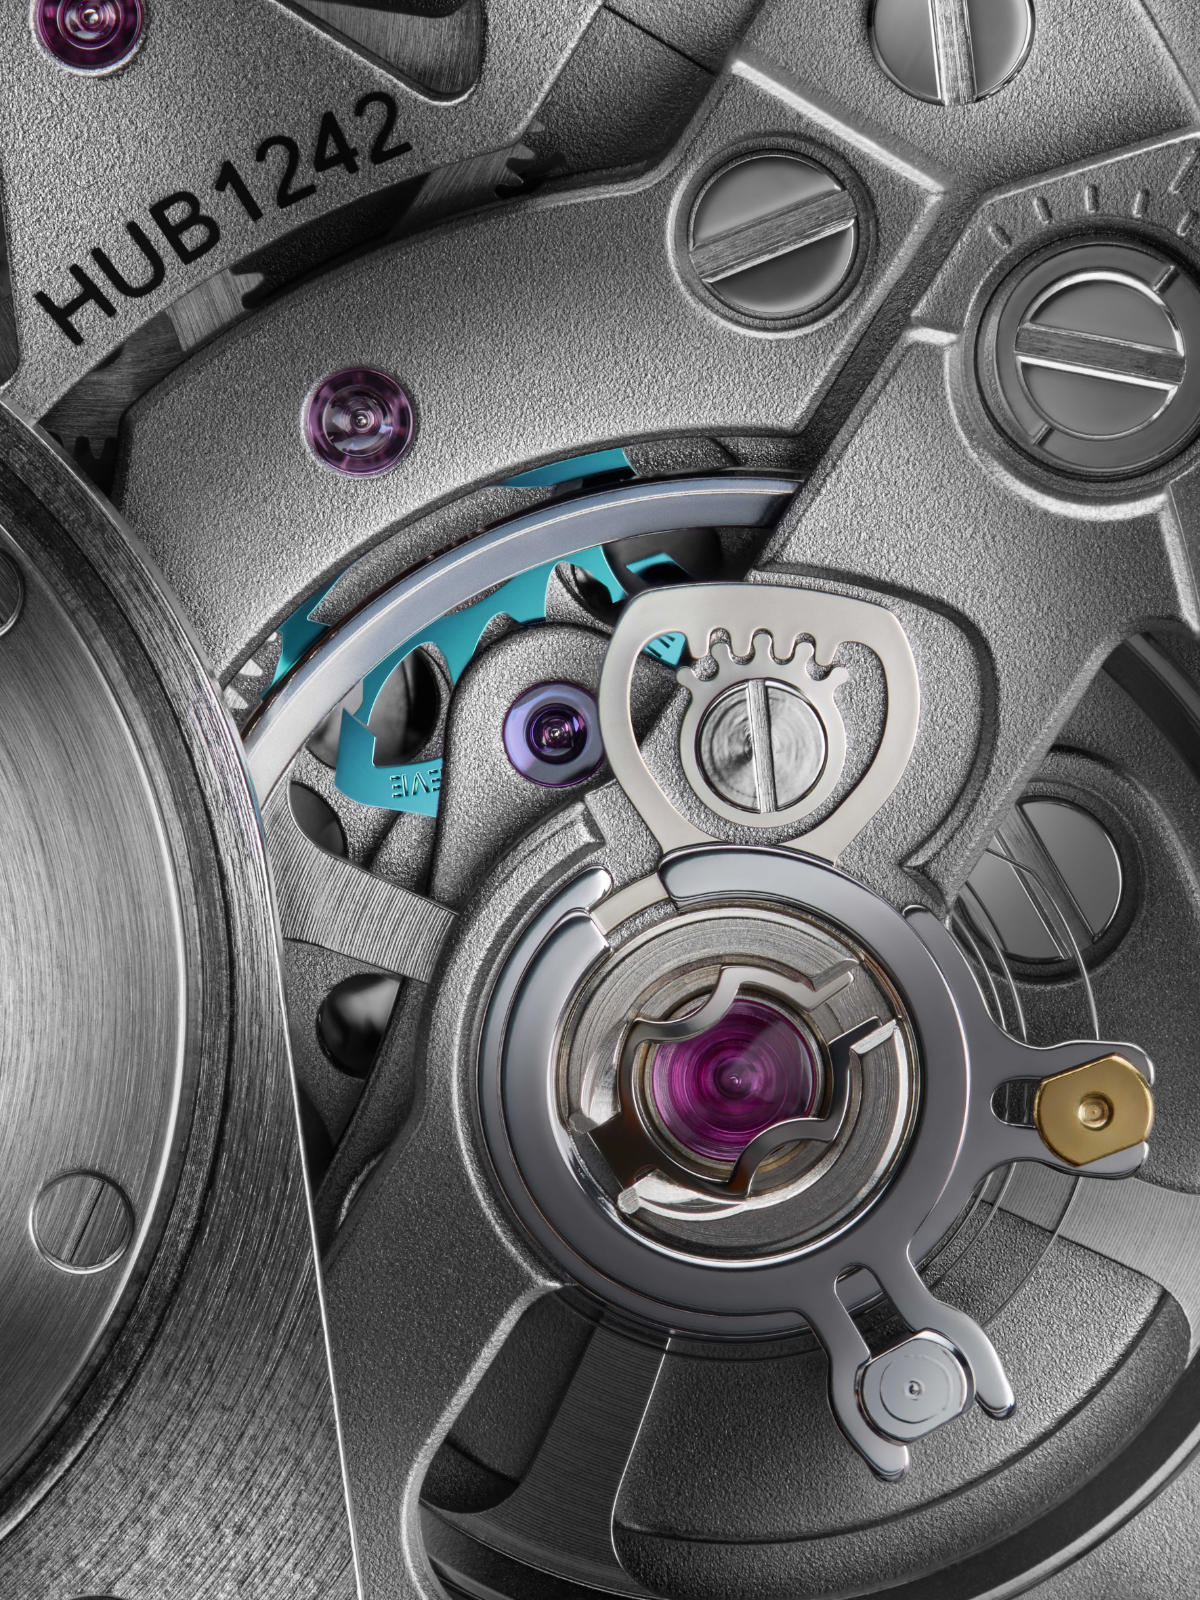 Hublot or the “Art of fusion”